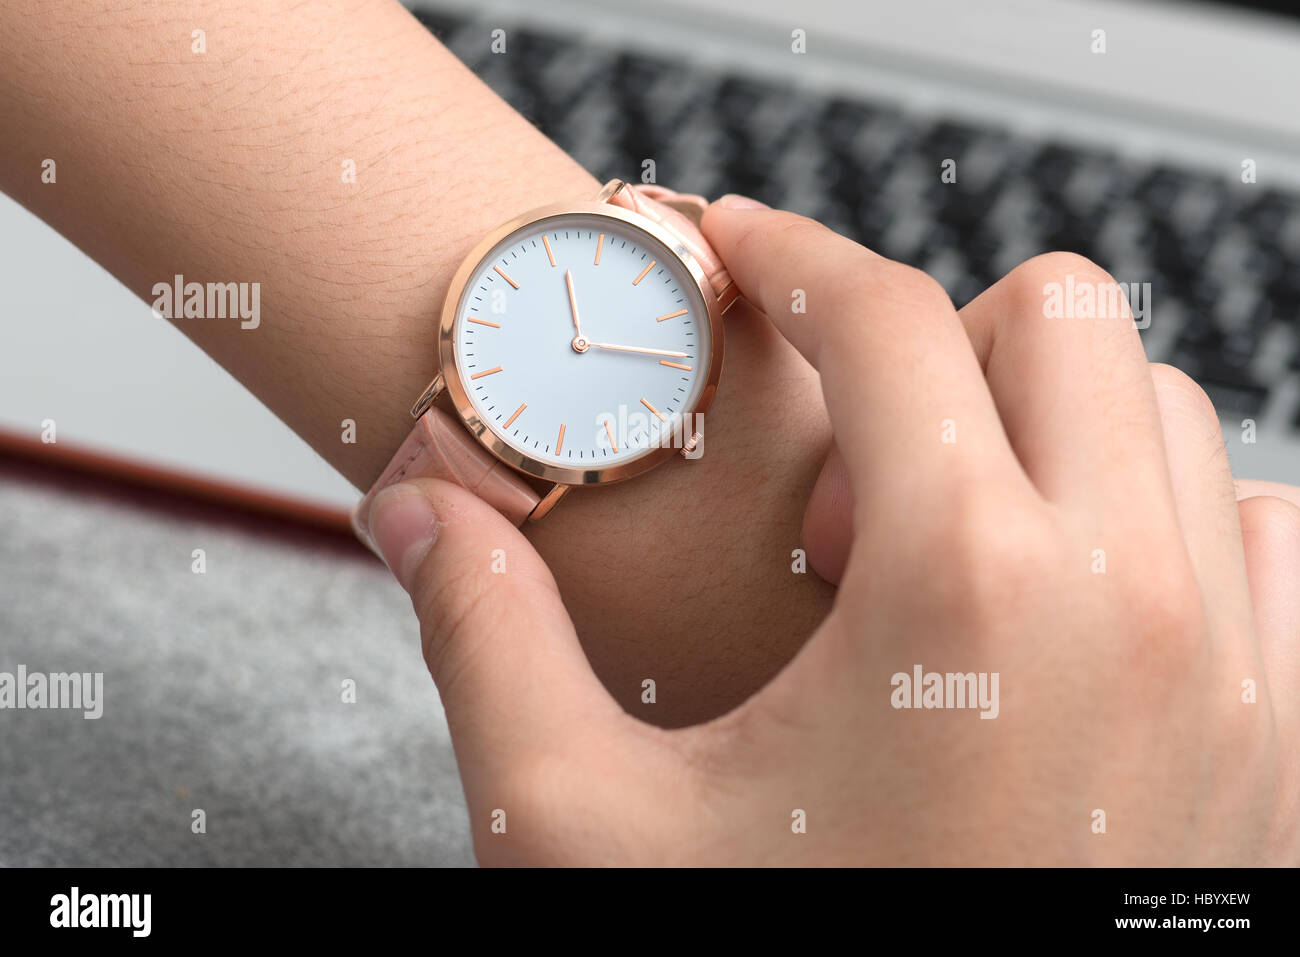 Girl's hand with wrist watch in front of desk with notebook computer Stock Photo